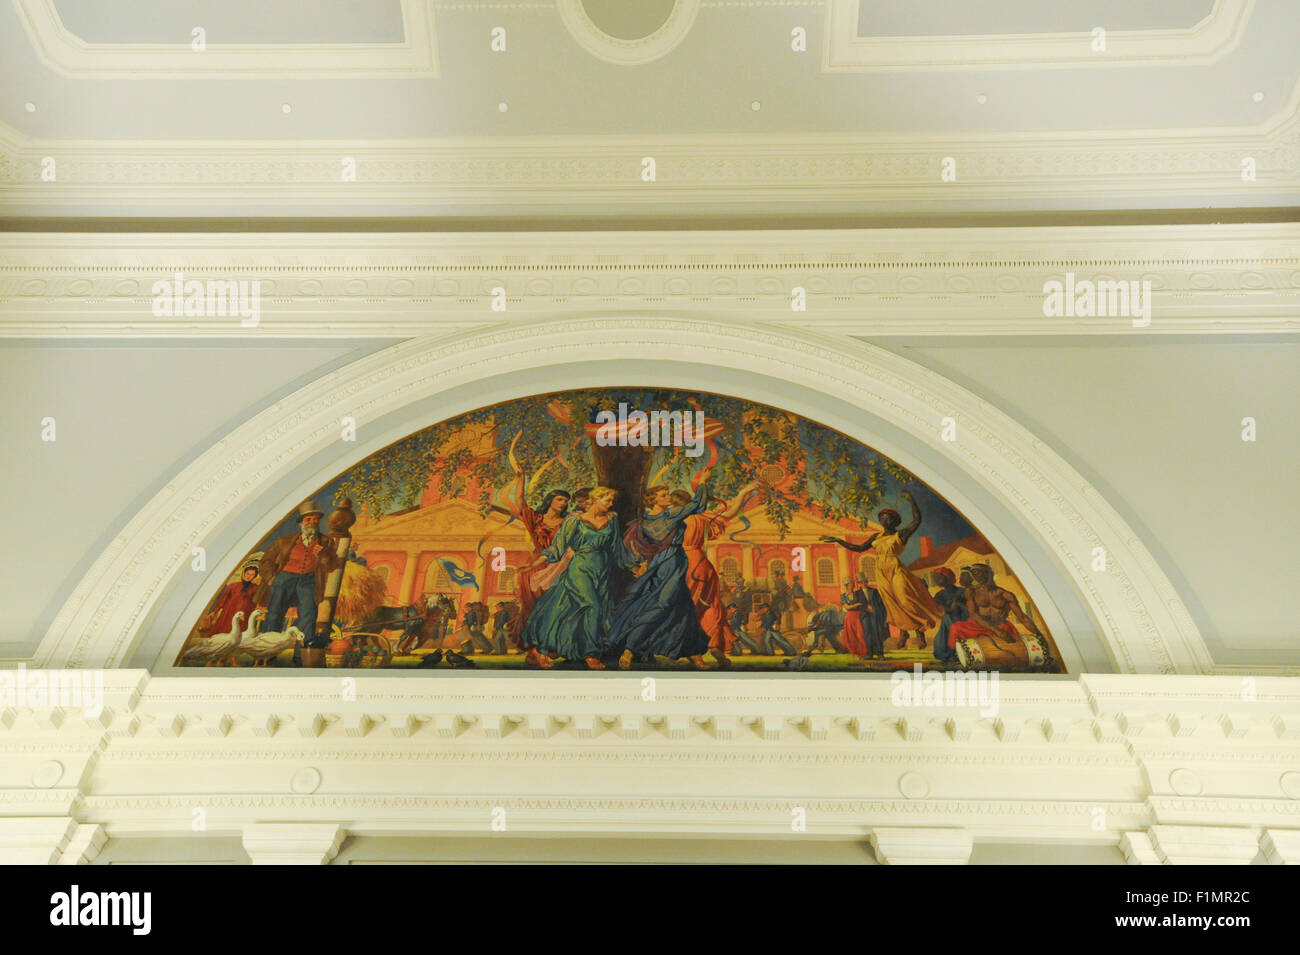 New Haven Free Public Library, New Haven, Connecticut. Lunette mural designed by Bancel La Farge and painted by Deane Keller. Paint mixed with beeswax. Stock Photo